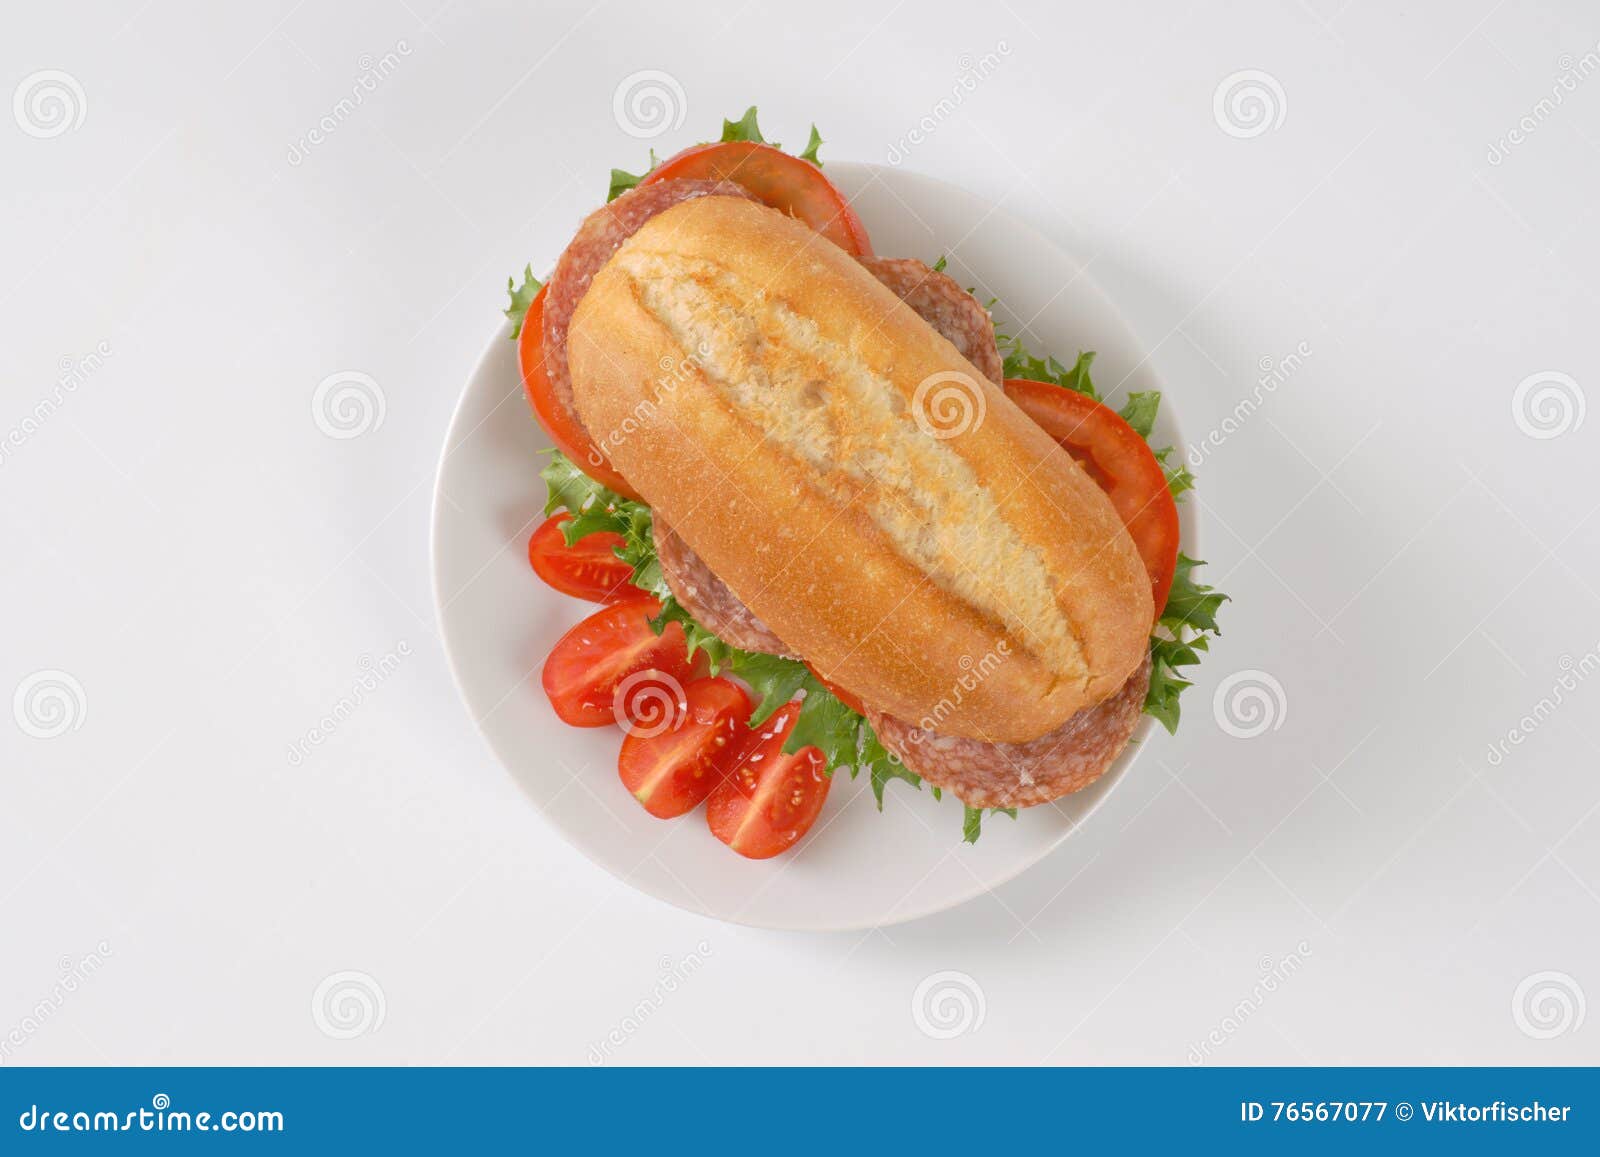 Fresh sandwich with salami stock image. Image of crust - 76567077